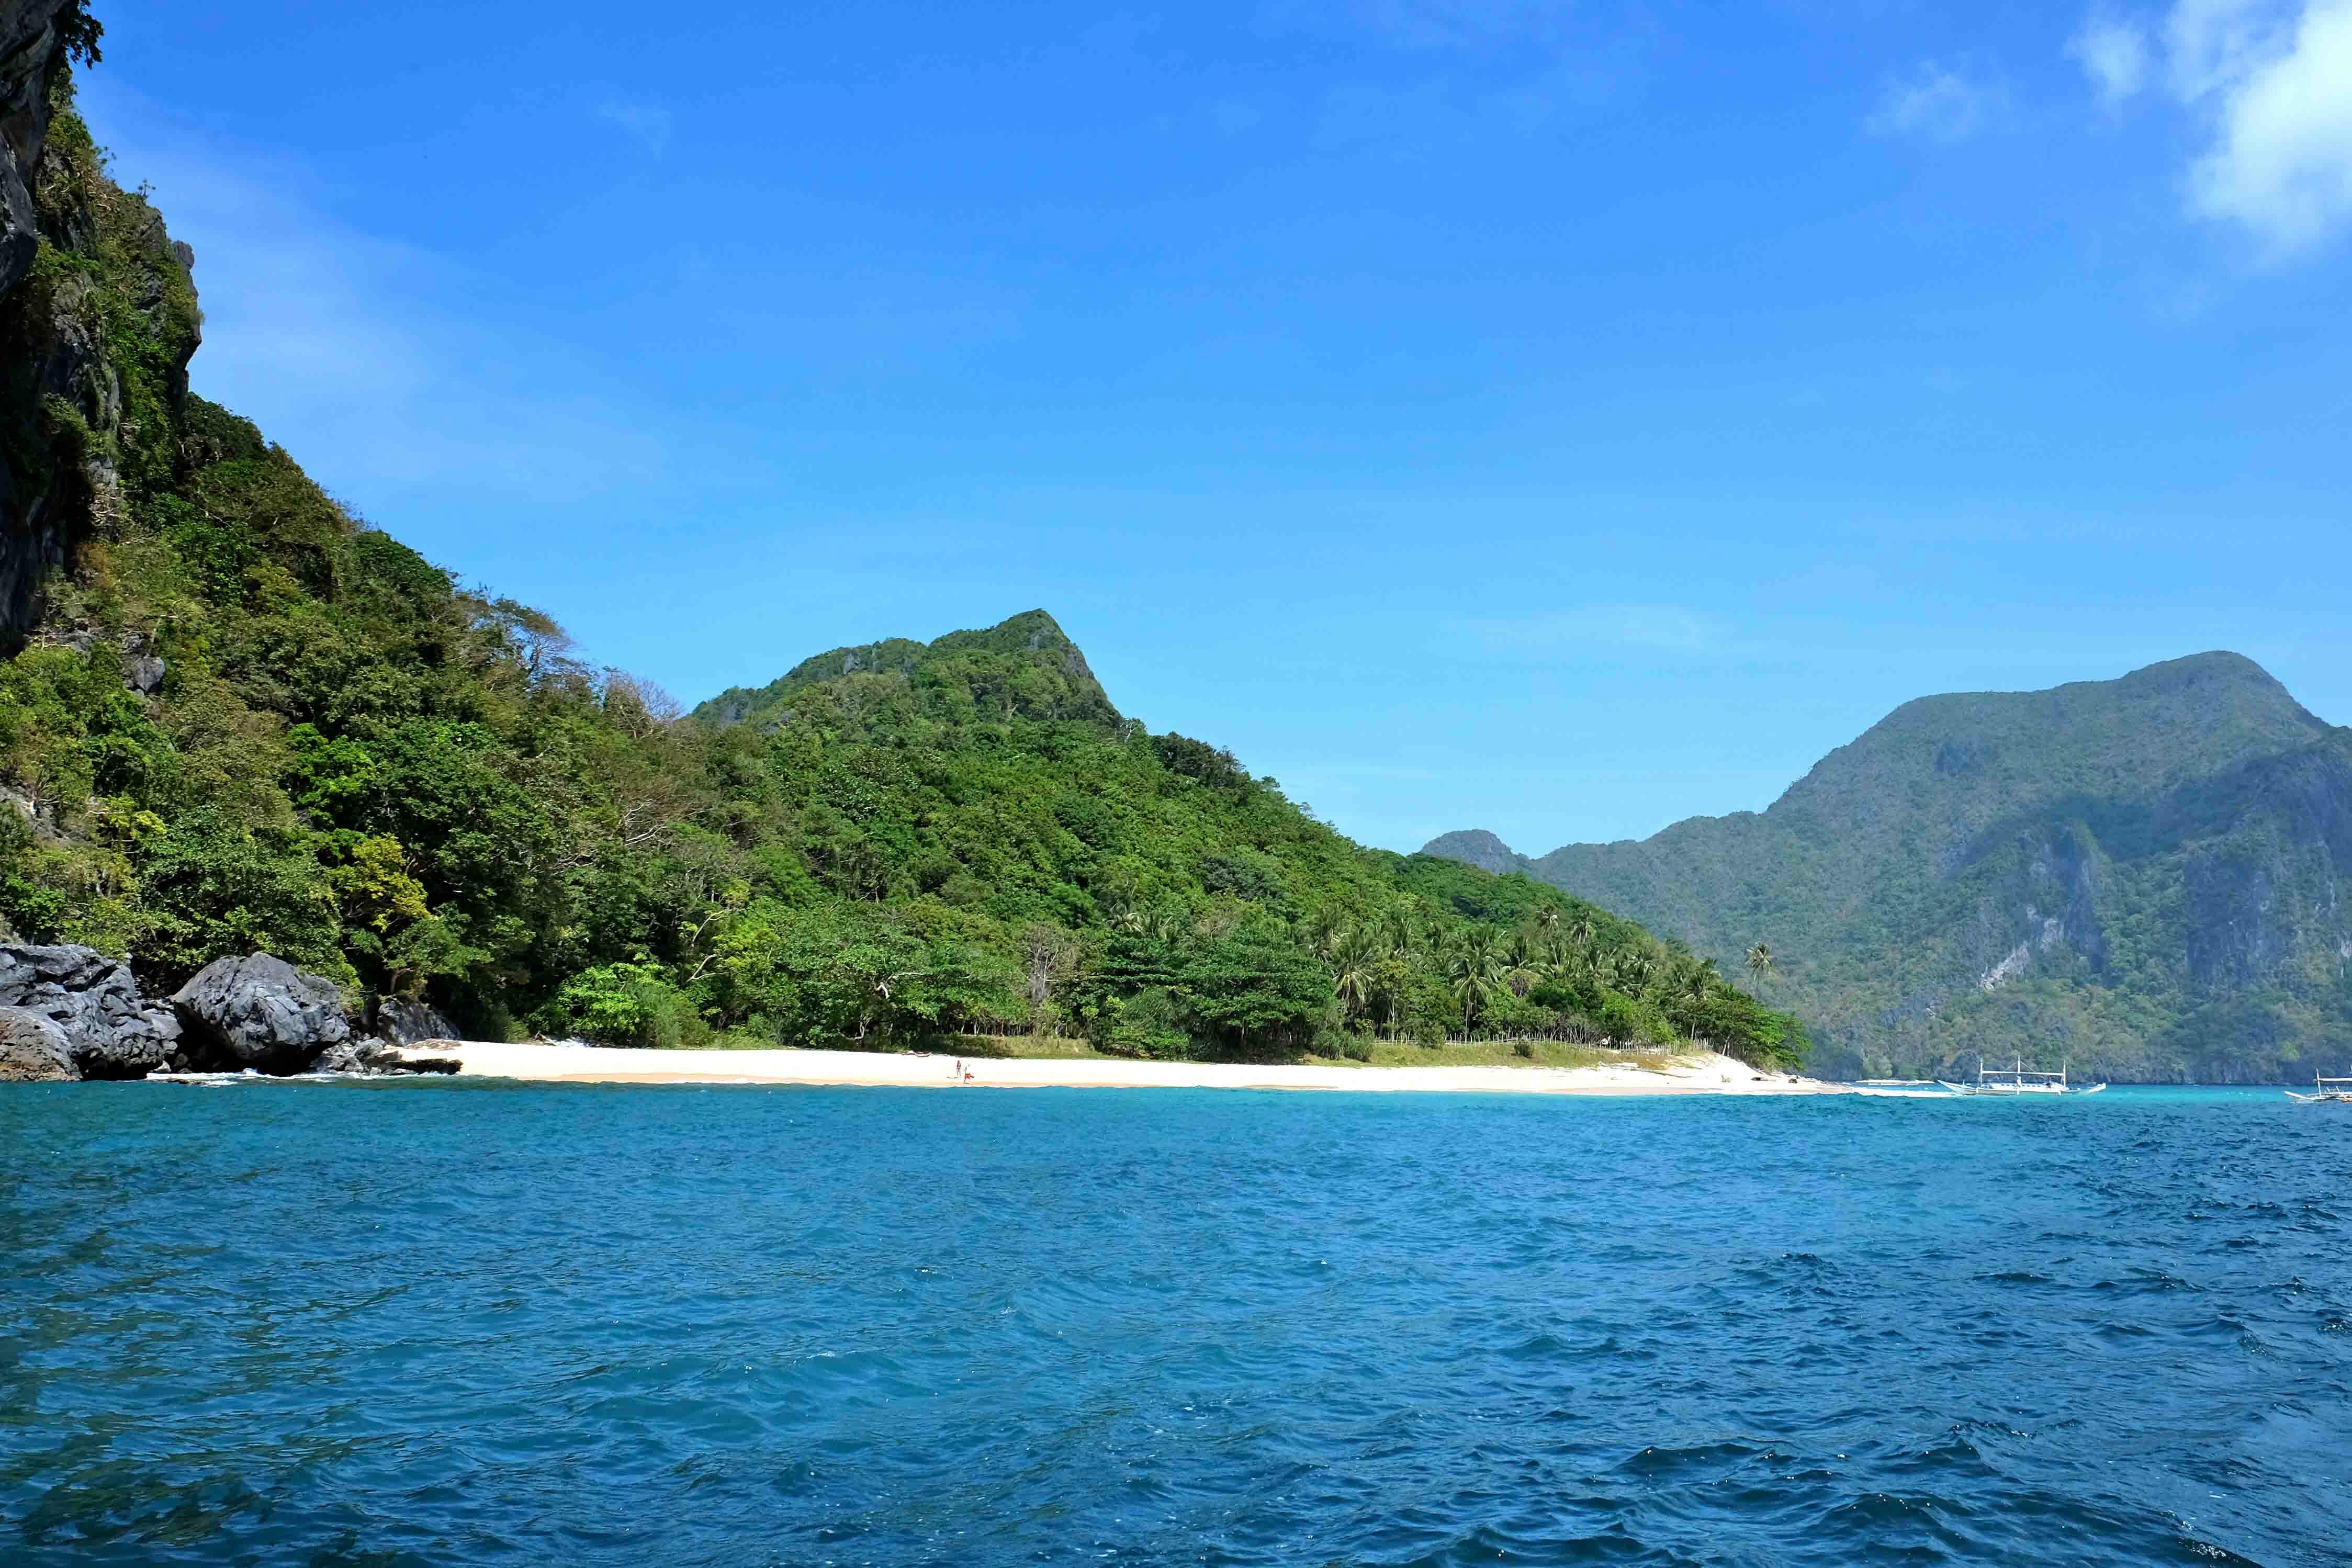 Island hopping edged with white sand beaches. Photo by Potpot Pinili/Rappler 